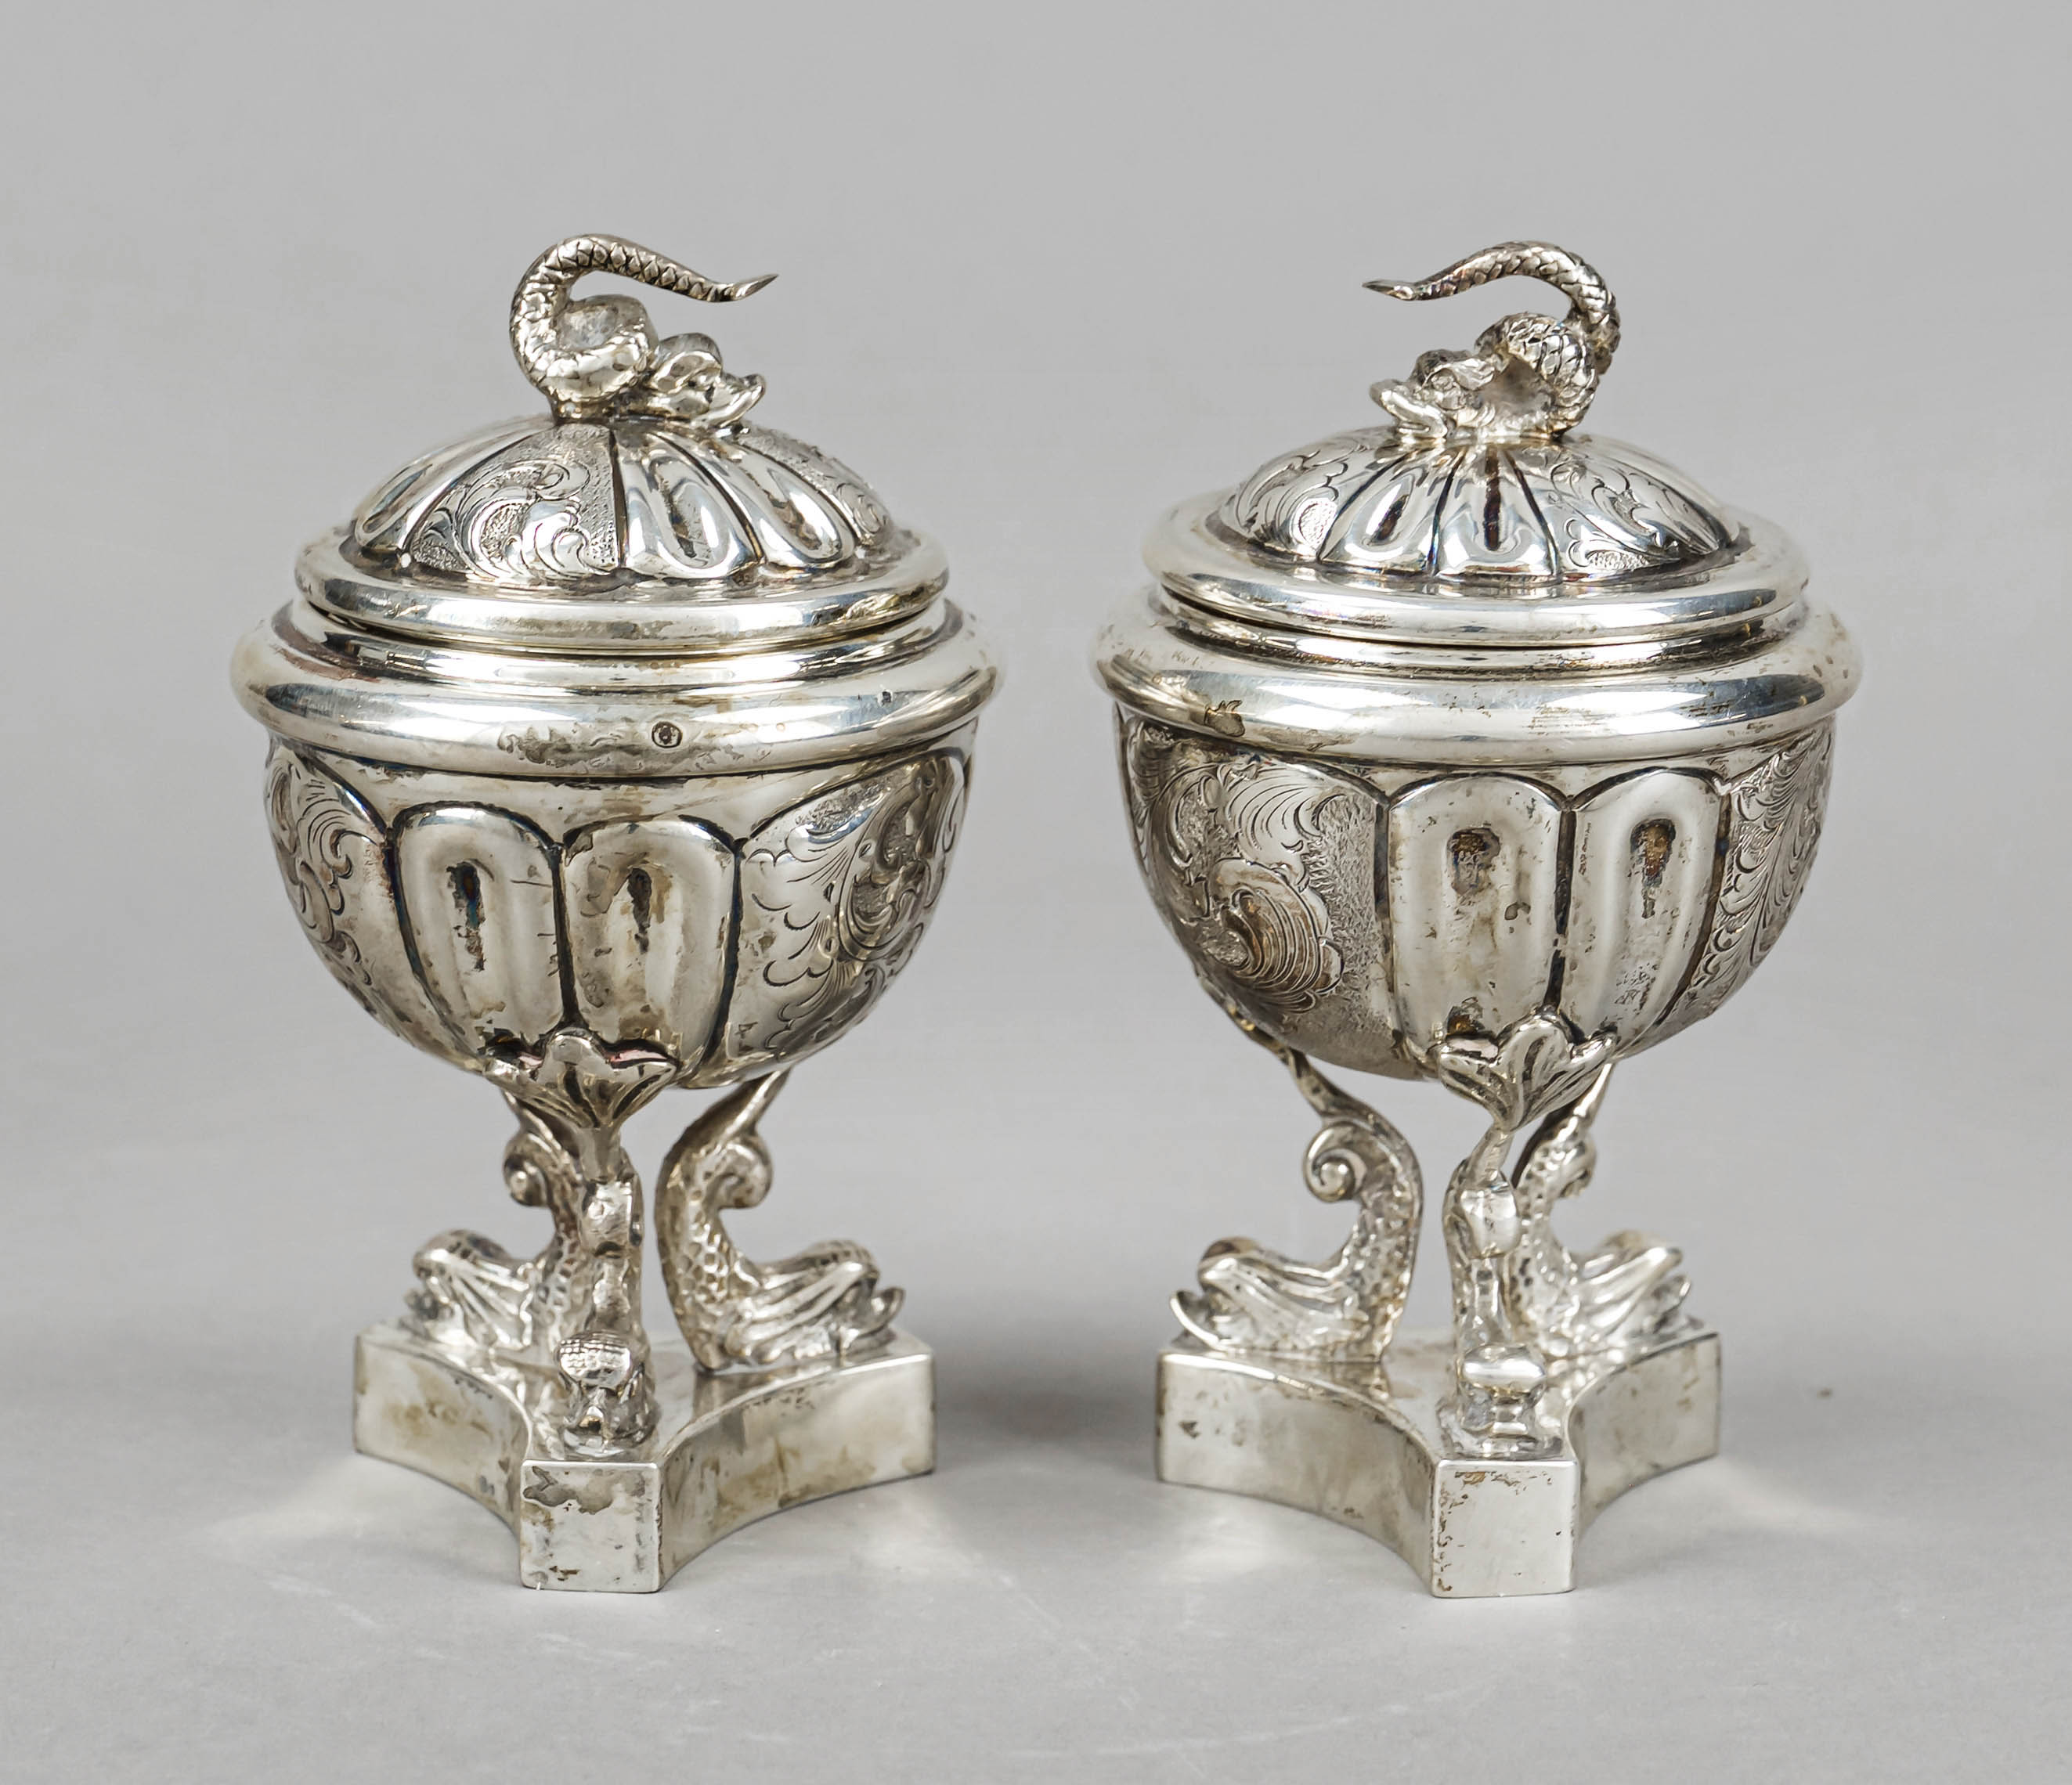 Pair of lidded vessels, Italy (?), early 20th century, silver 835/000, 3-pass stand, vessel on 3